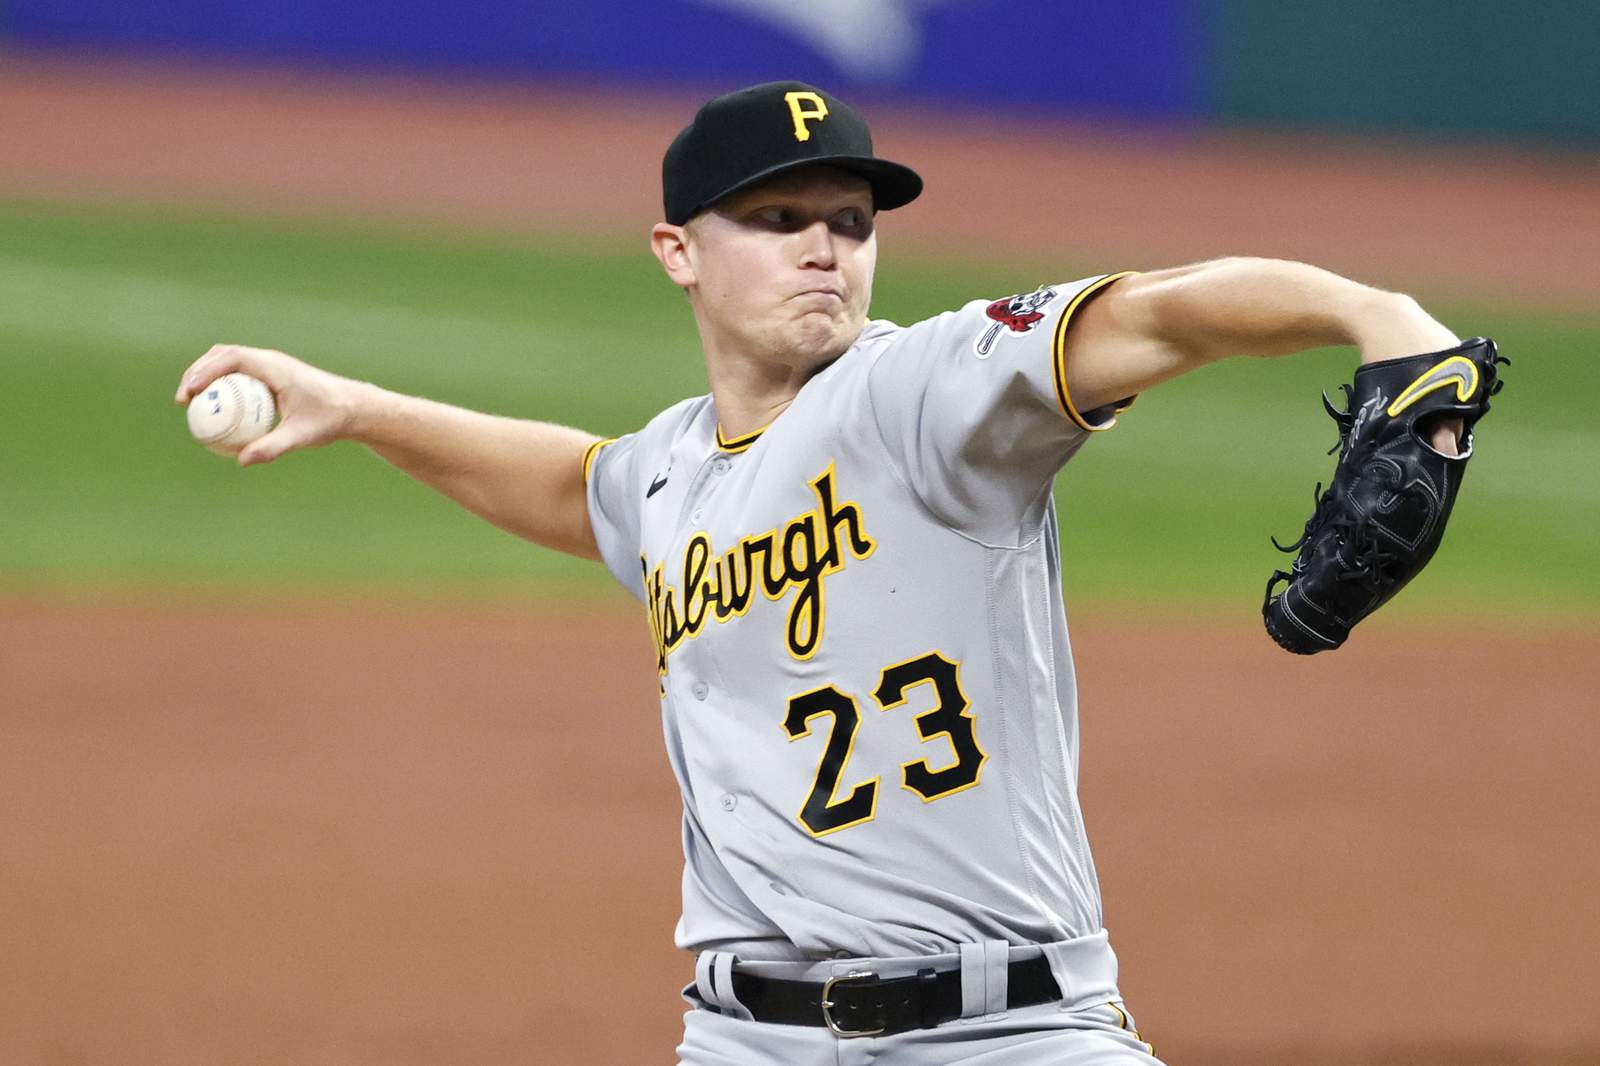 Pirates' Keller out after 5 no-hit innings against Indians